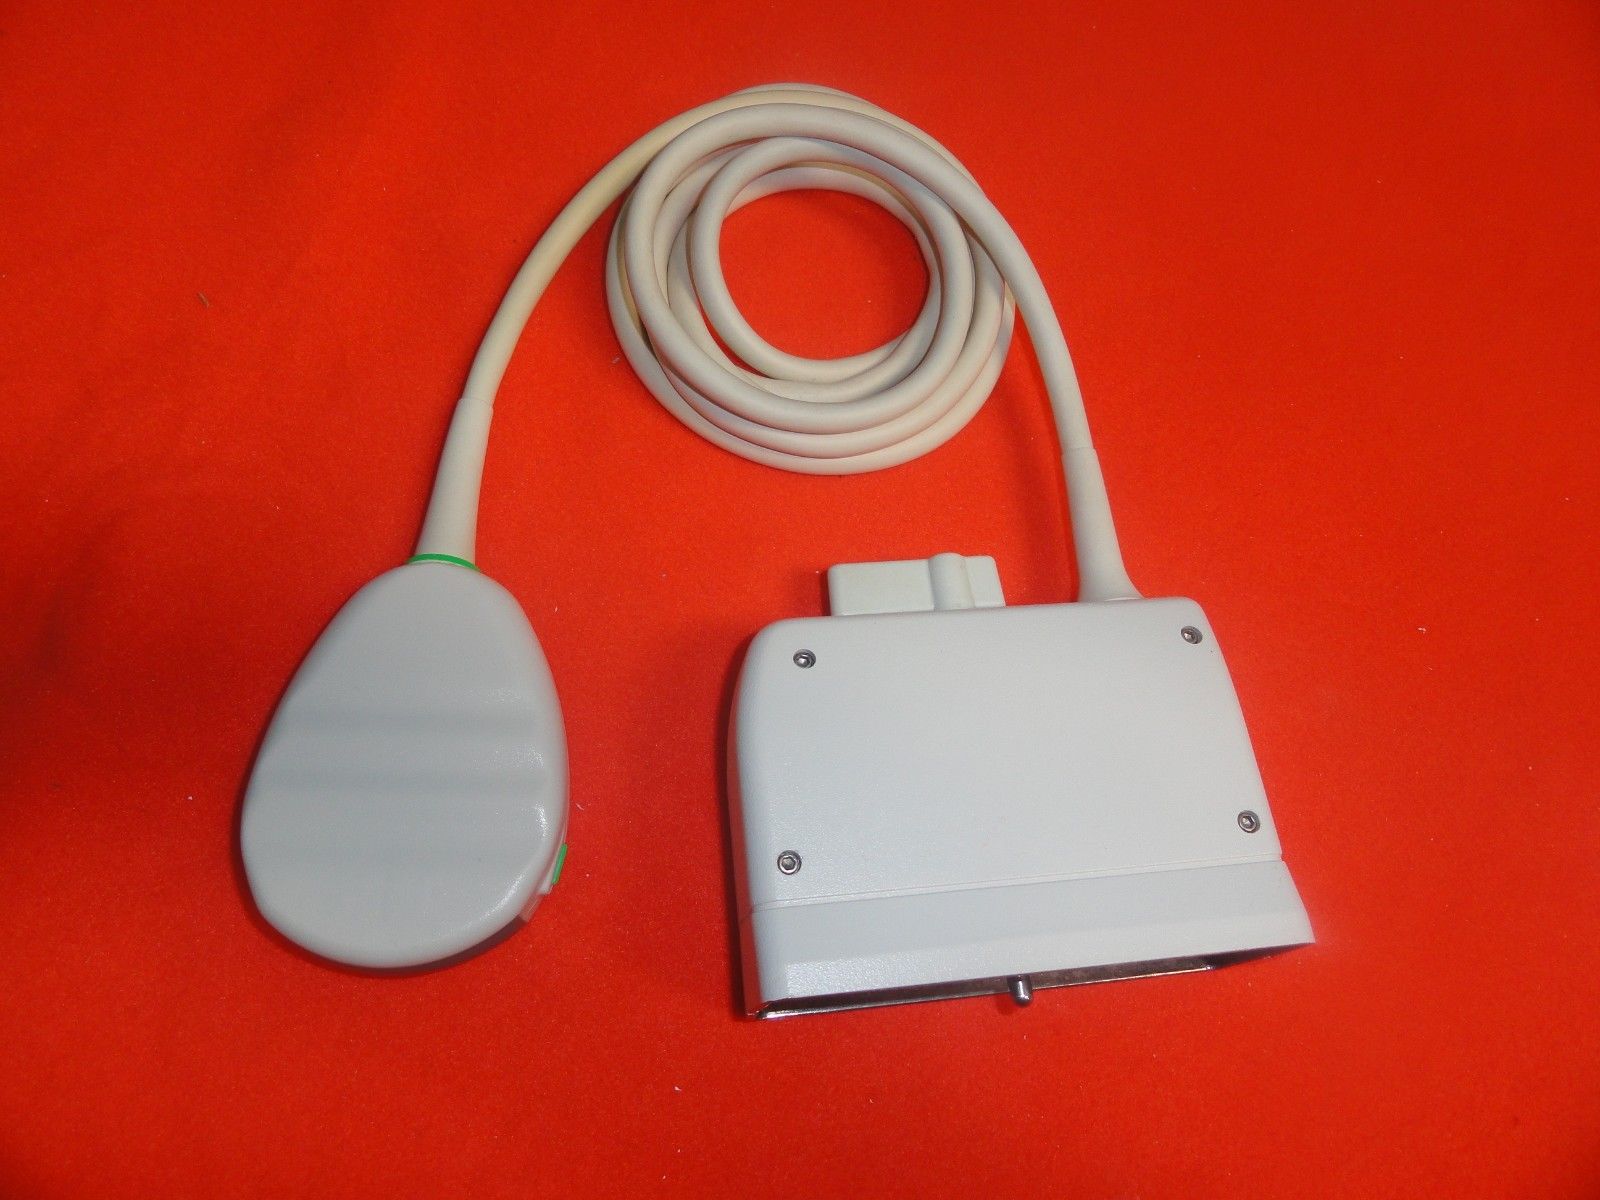 2009 Philips C7-4 40R Curved Array Convex  Probe for ATL HDI Series  (5963 ) DIAGNOSTIC ULTRASOUND MACHINES FOR SALE